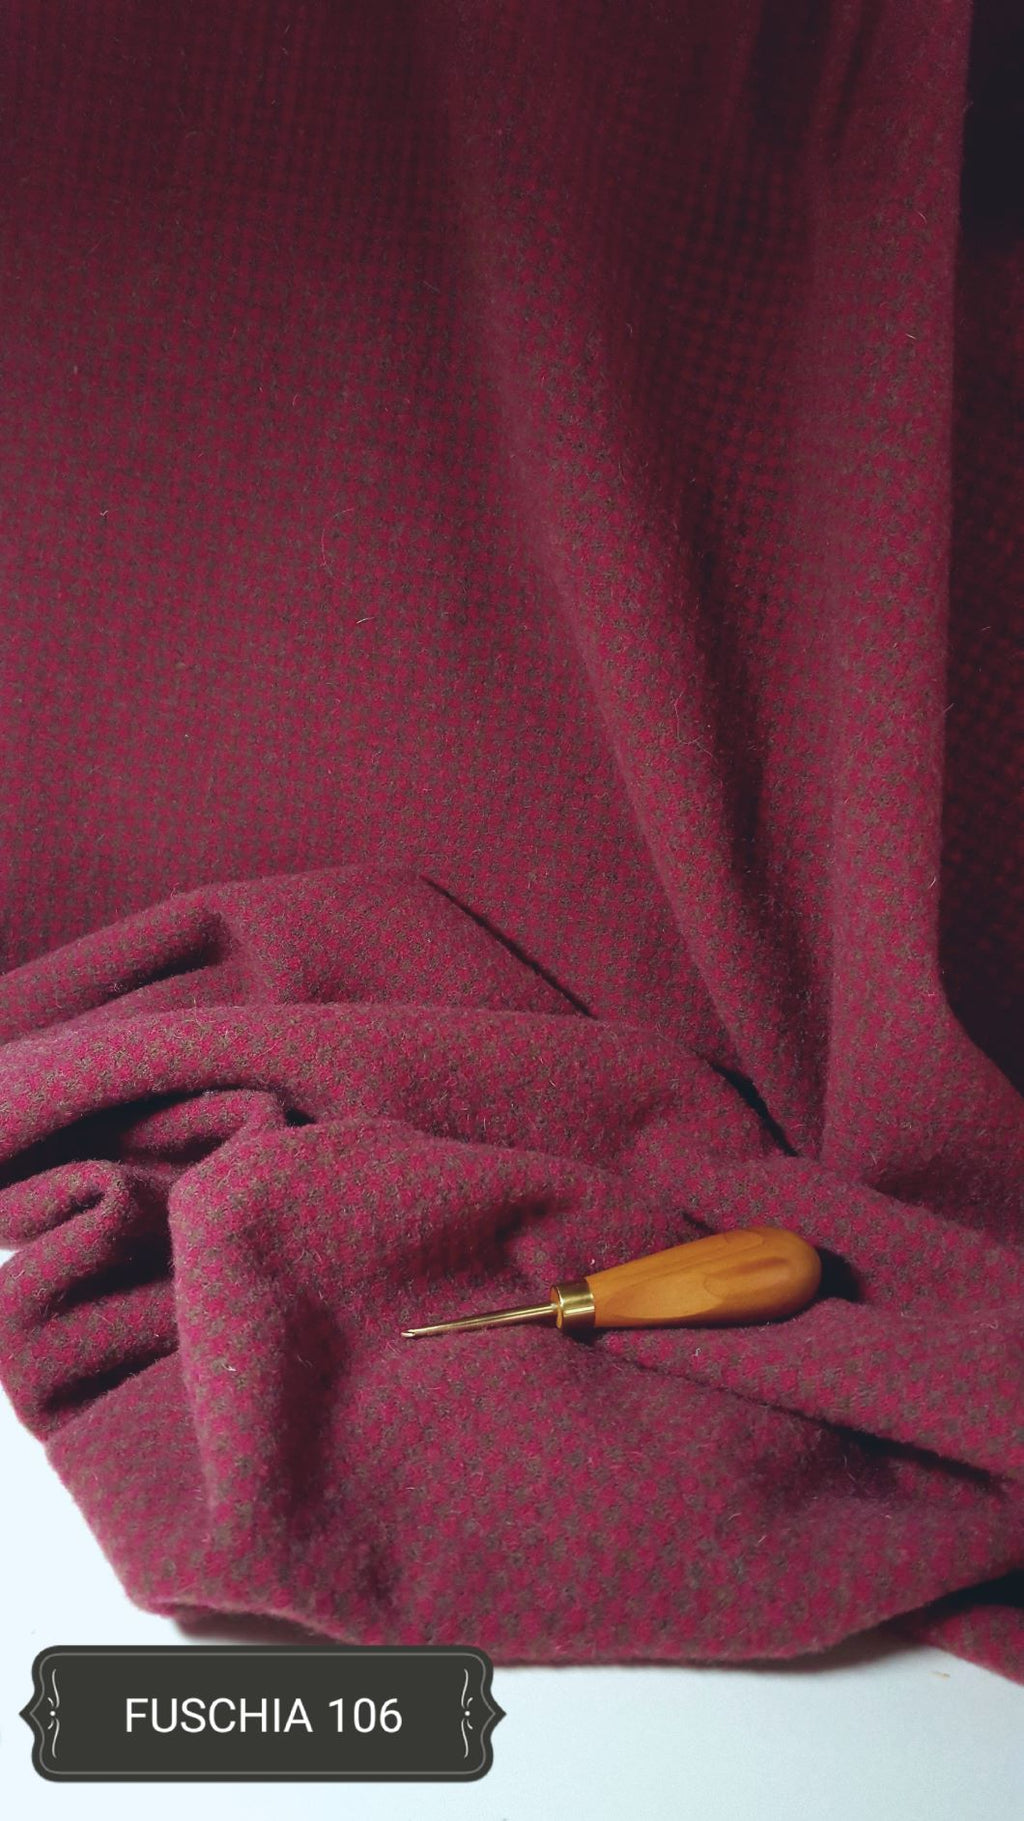 Fuschia #106 - Ready to use Wool Fabric for Rug Hooking or Wool Applique